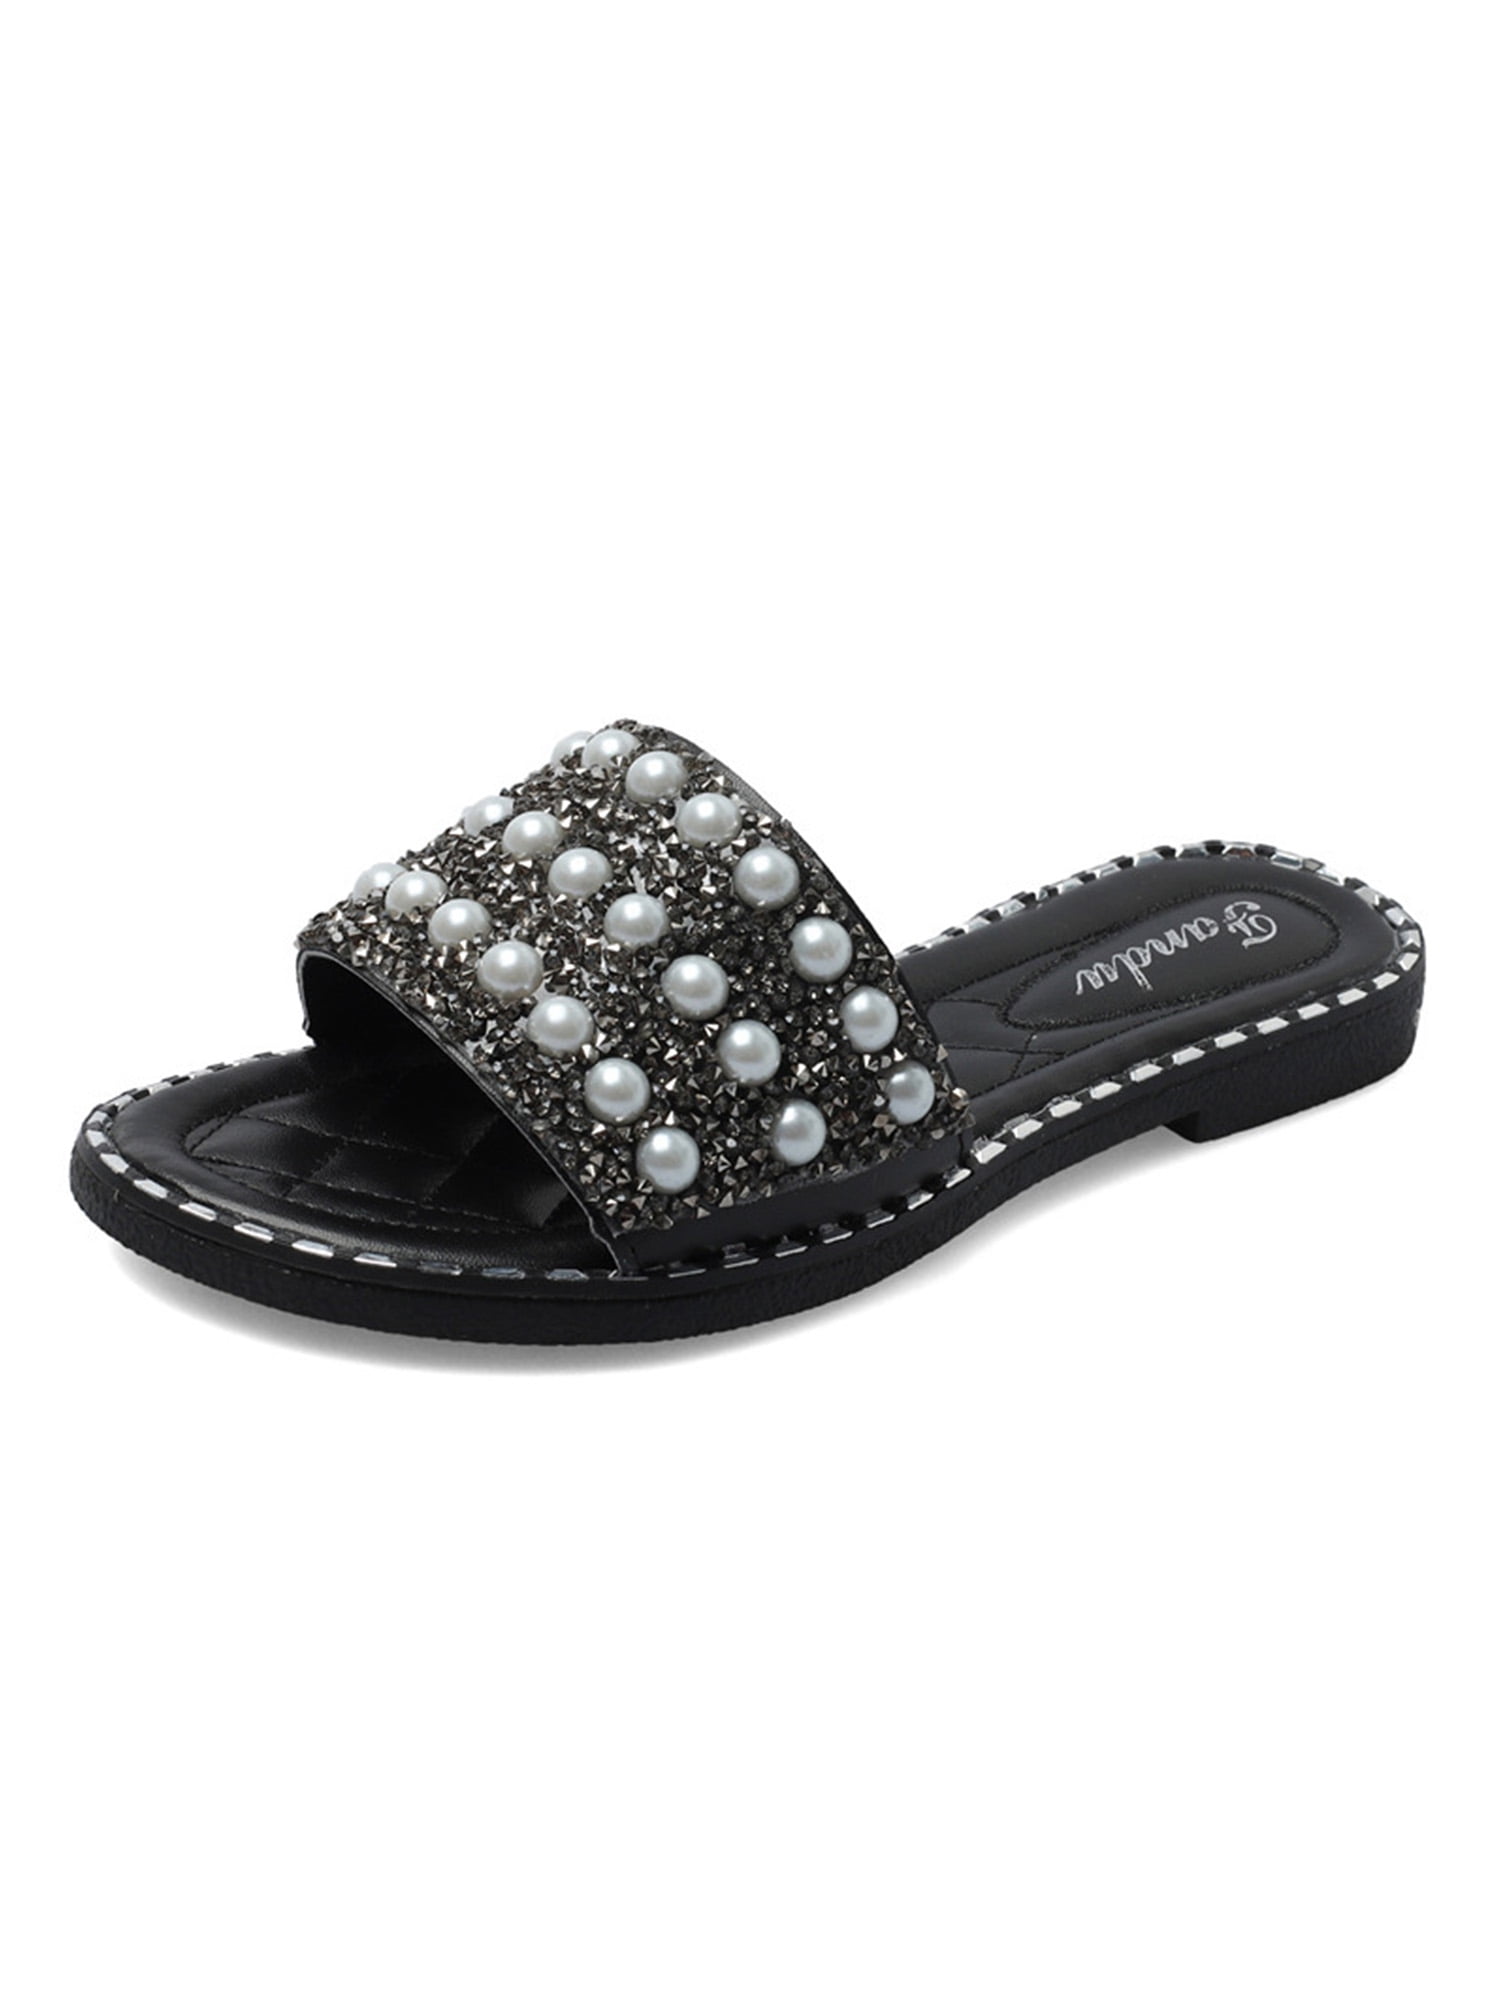 LADIES FLAT SLIP ON SLIDERS WOMENS SUMMER COMFY STUDDED BEACH CAGE SHOES SZ 3-8